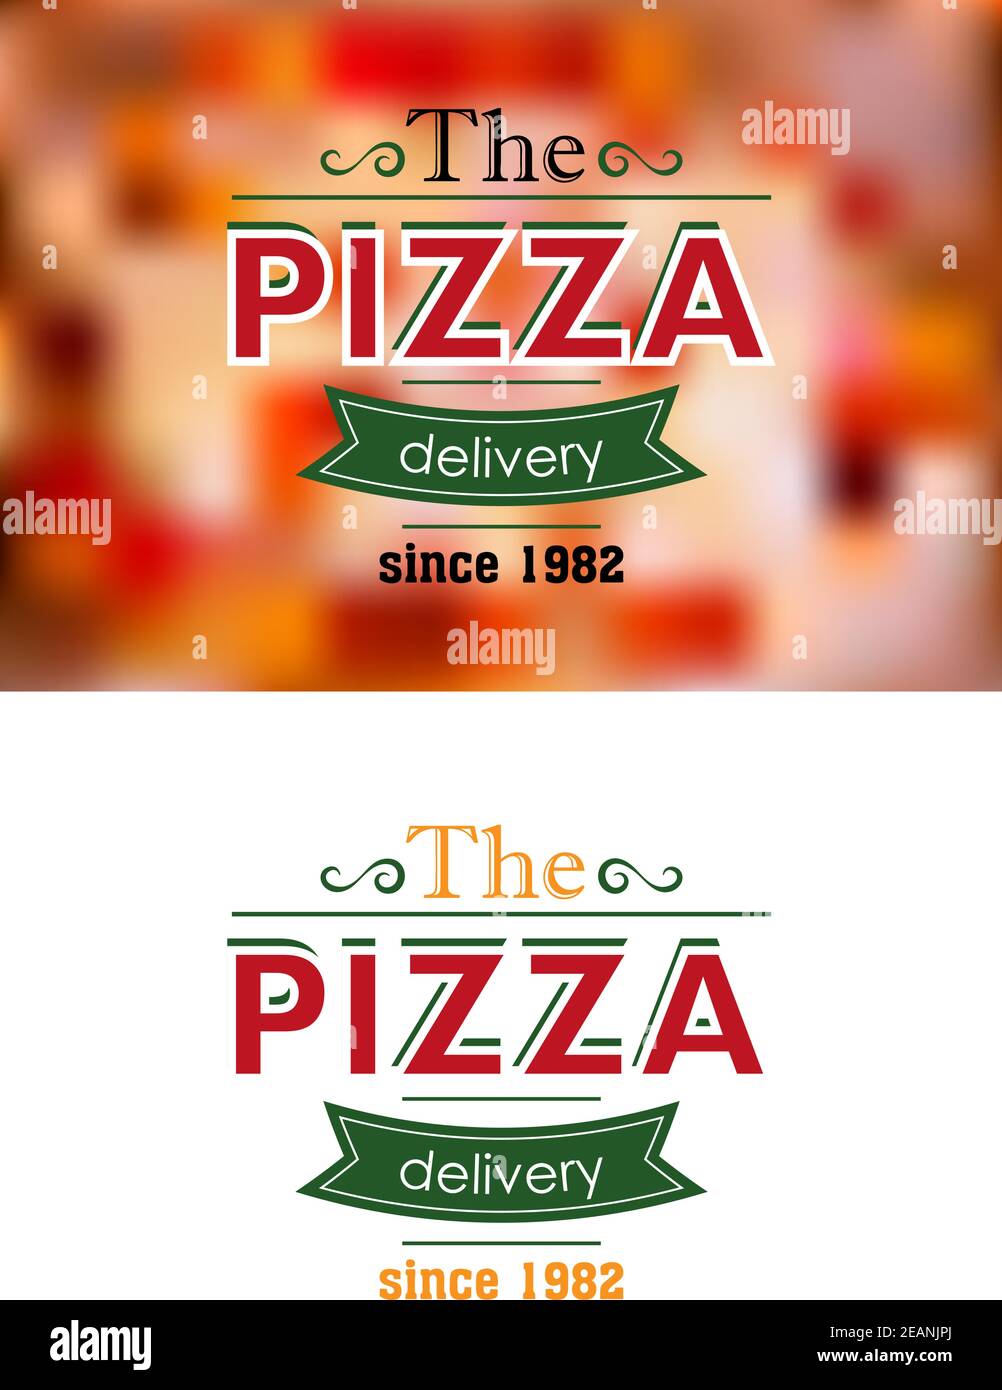 Delivery since 1982 retro pizza label or banner on colored and white background for cafe, restaurant or fast food menu design Stock Vector